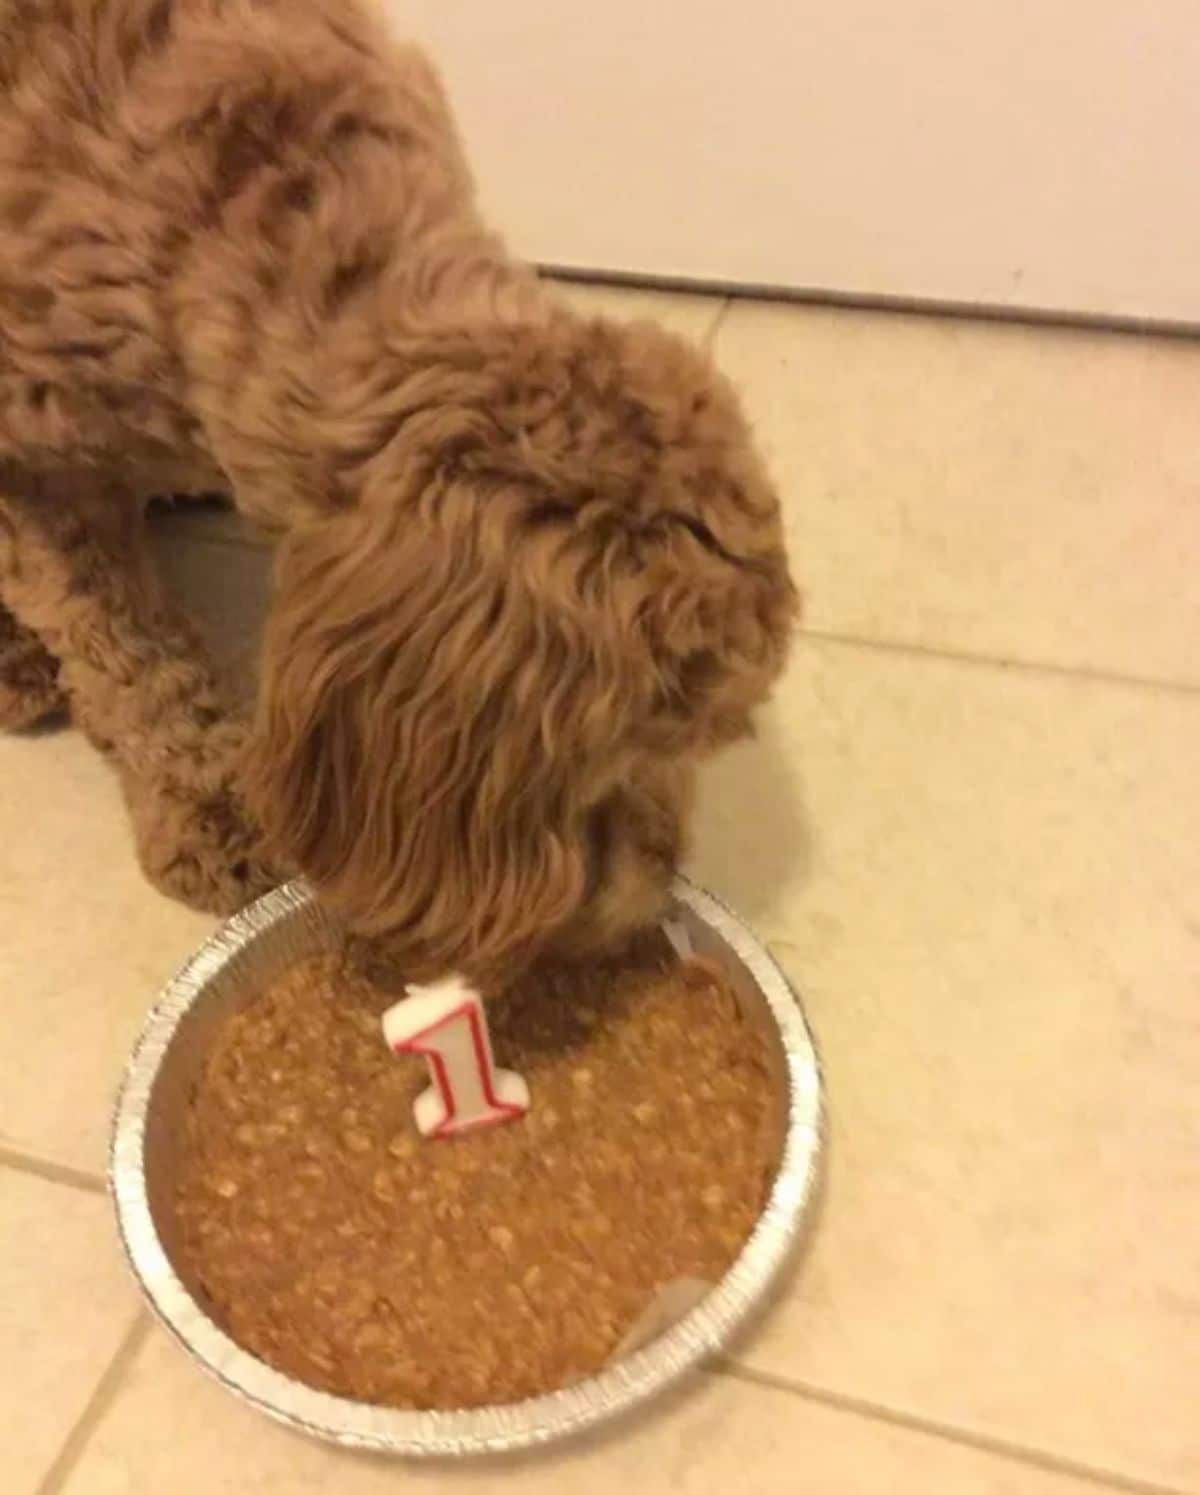 brown poodle eating a brown birthday cake with a 1 candle in the middle